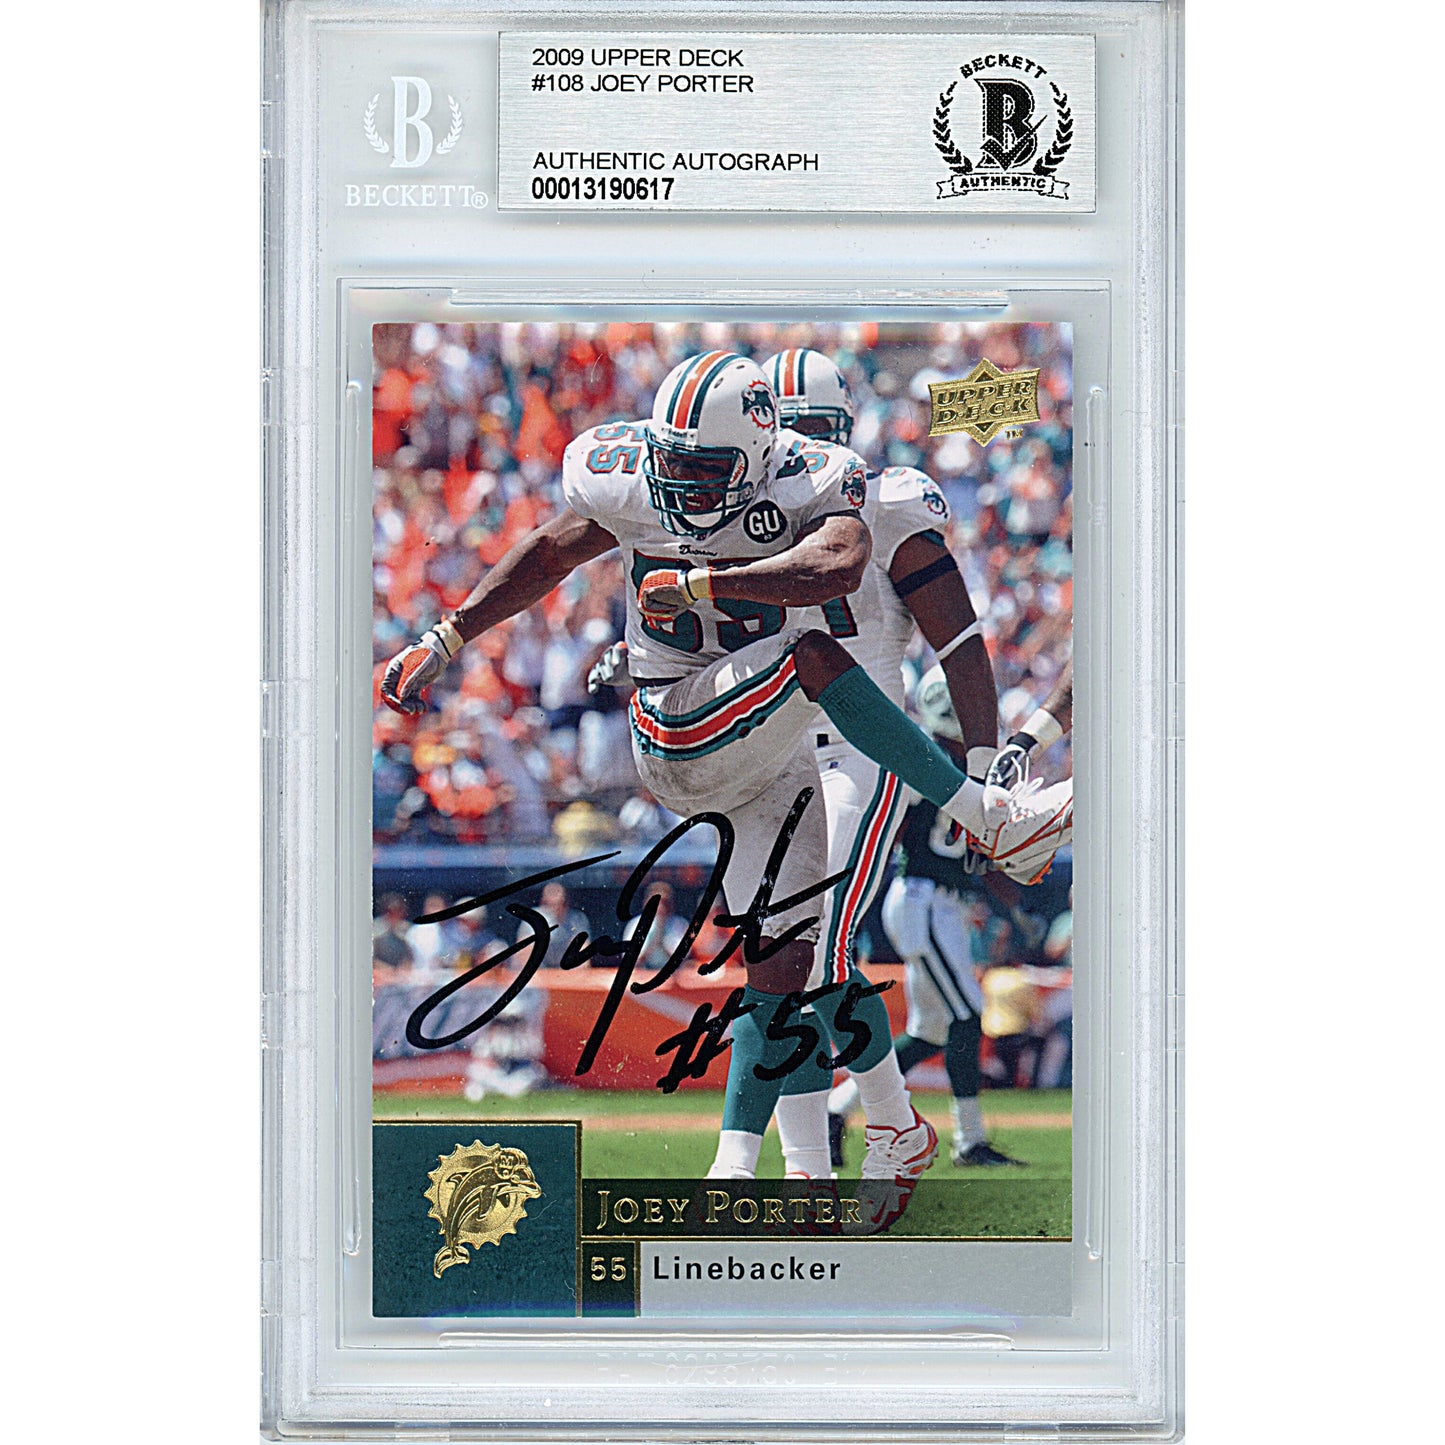 Footballs- Autographed- Joey Porter Signed Miami Dolphins 2009 Upper Deck Football Card Beckett BAS Authenticated Slabbed 00013190617 - 101